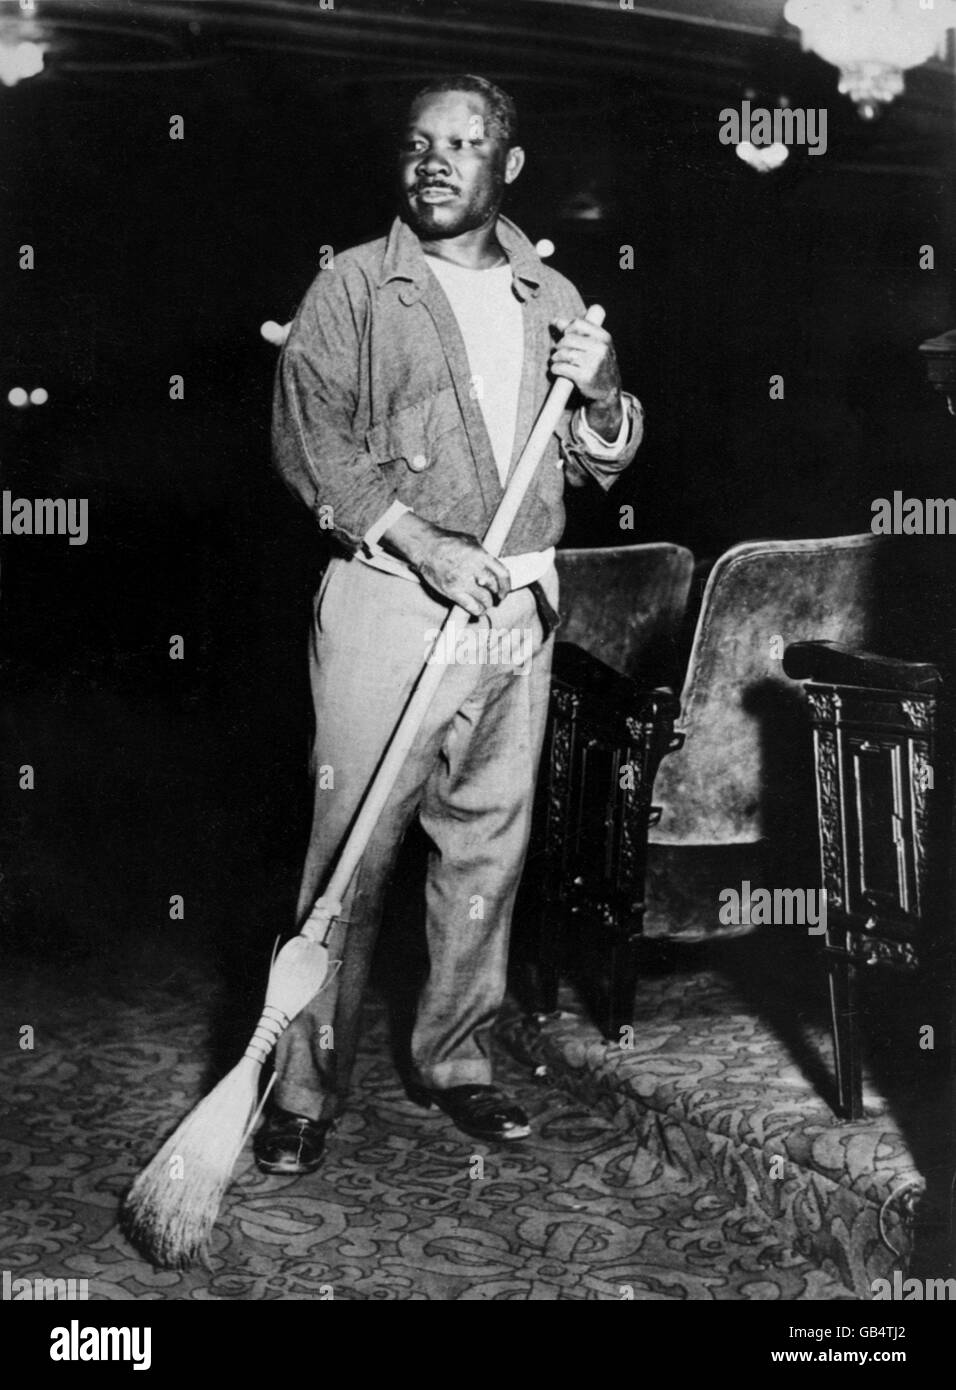 Former World Welterweight Champion Joe Walcott, one of the greatest pound-for-pound fighters of all time, sweeps up at the Imperial Theatre, New York. Stock Photo